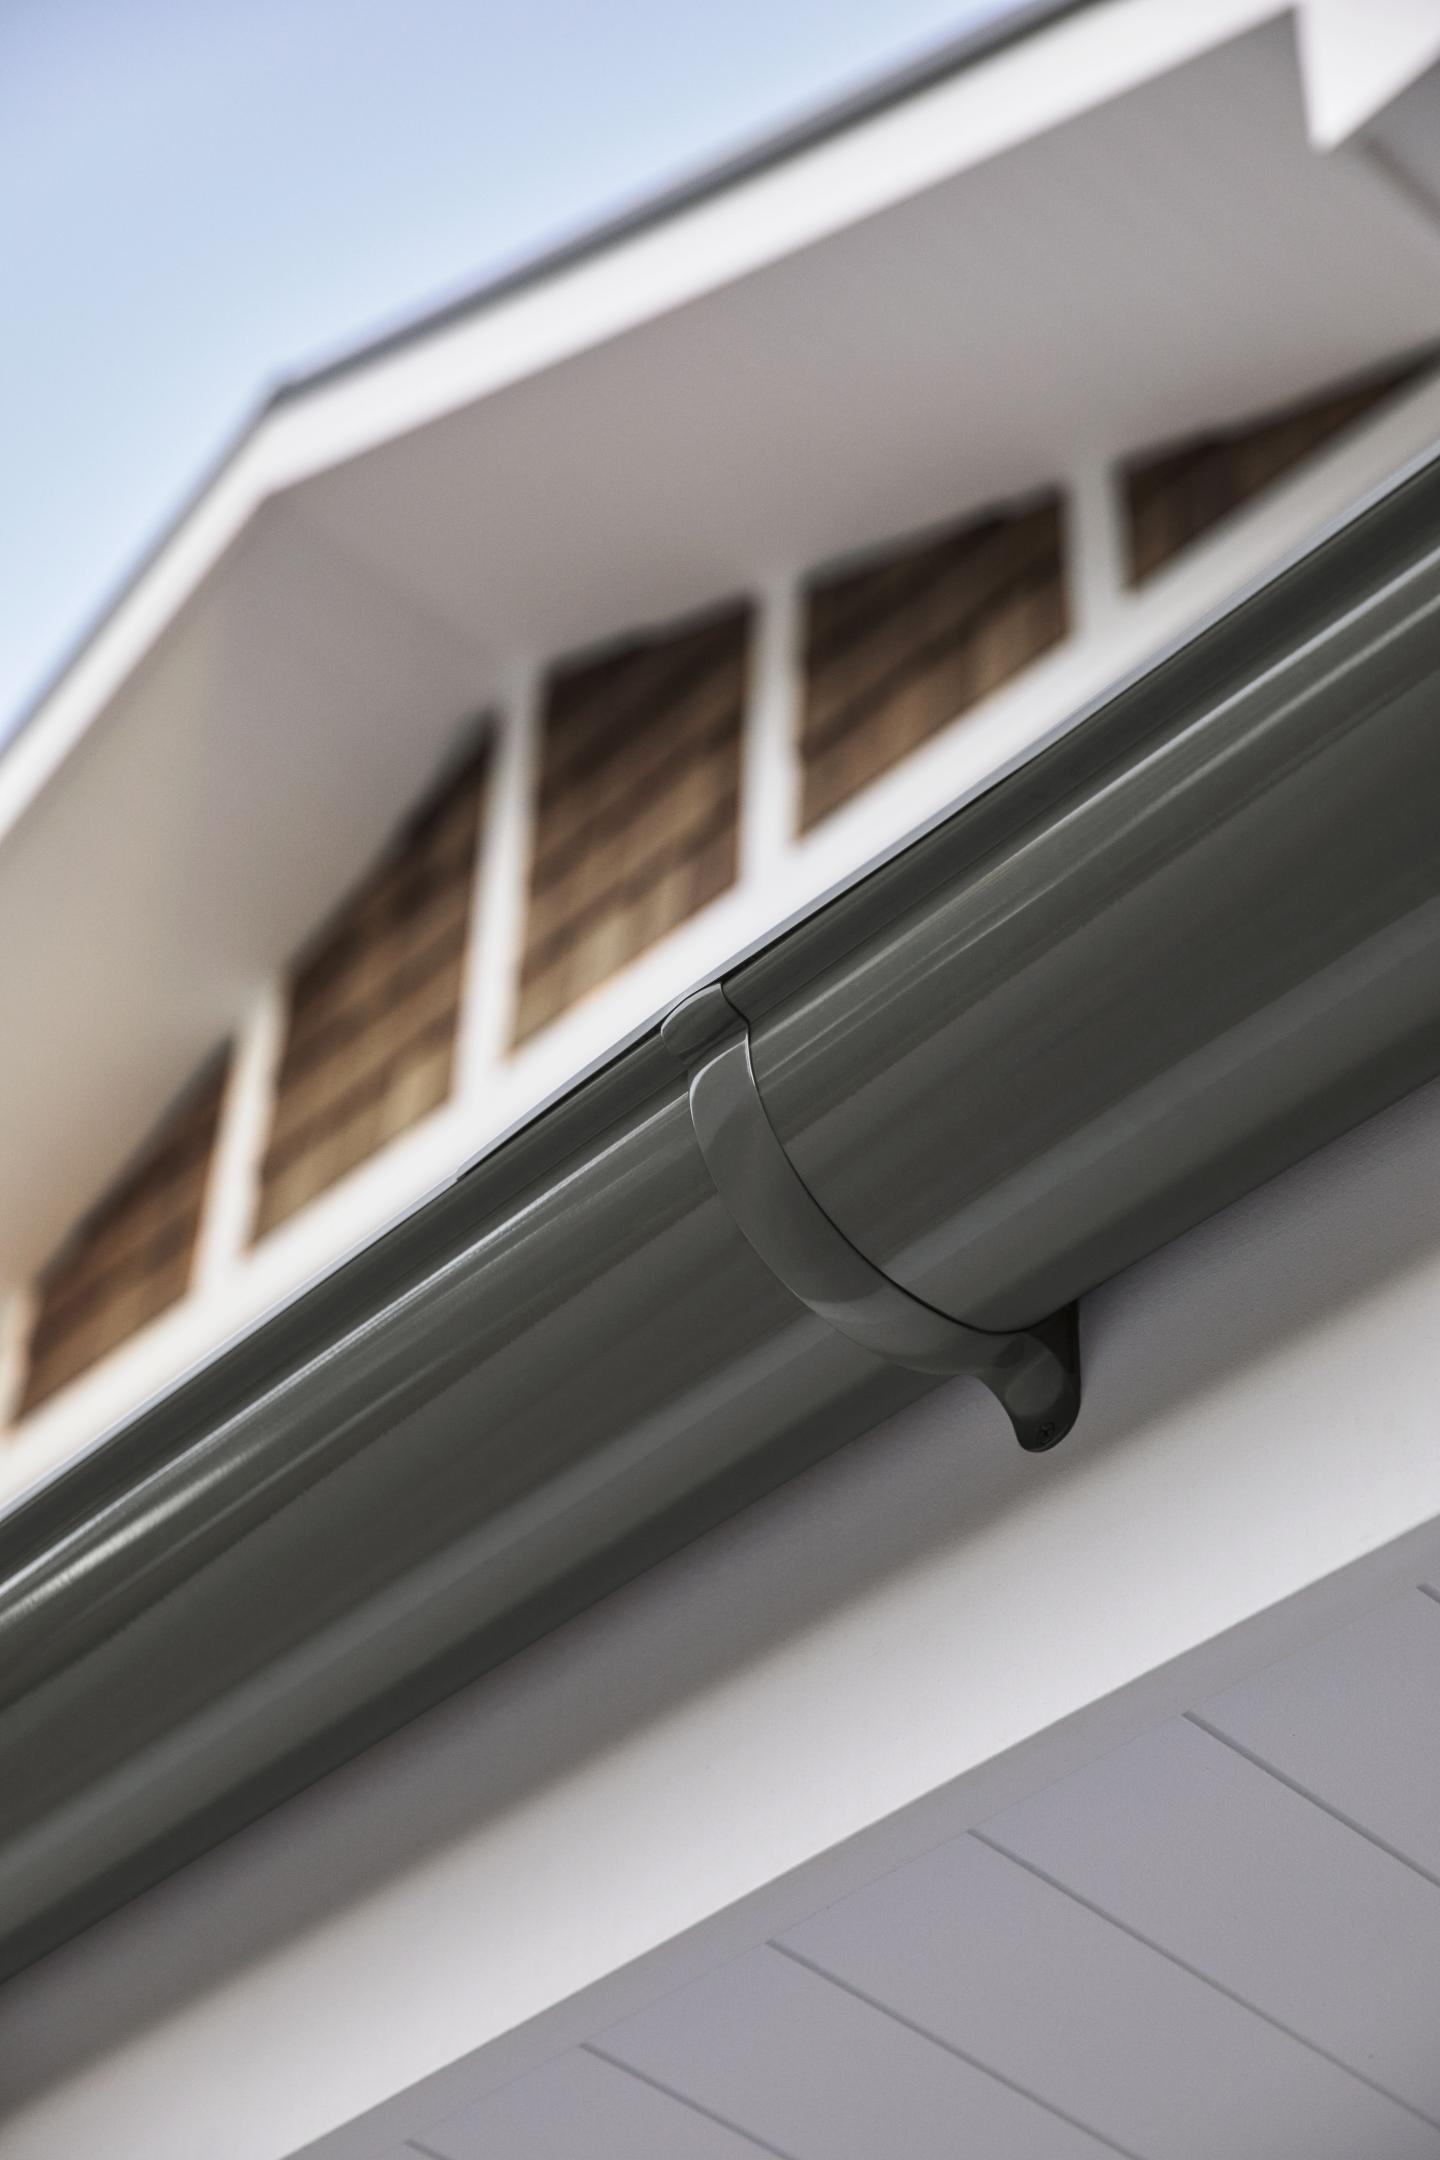 Roofing gutters